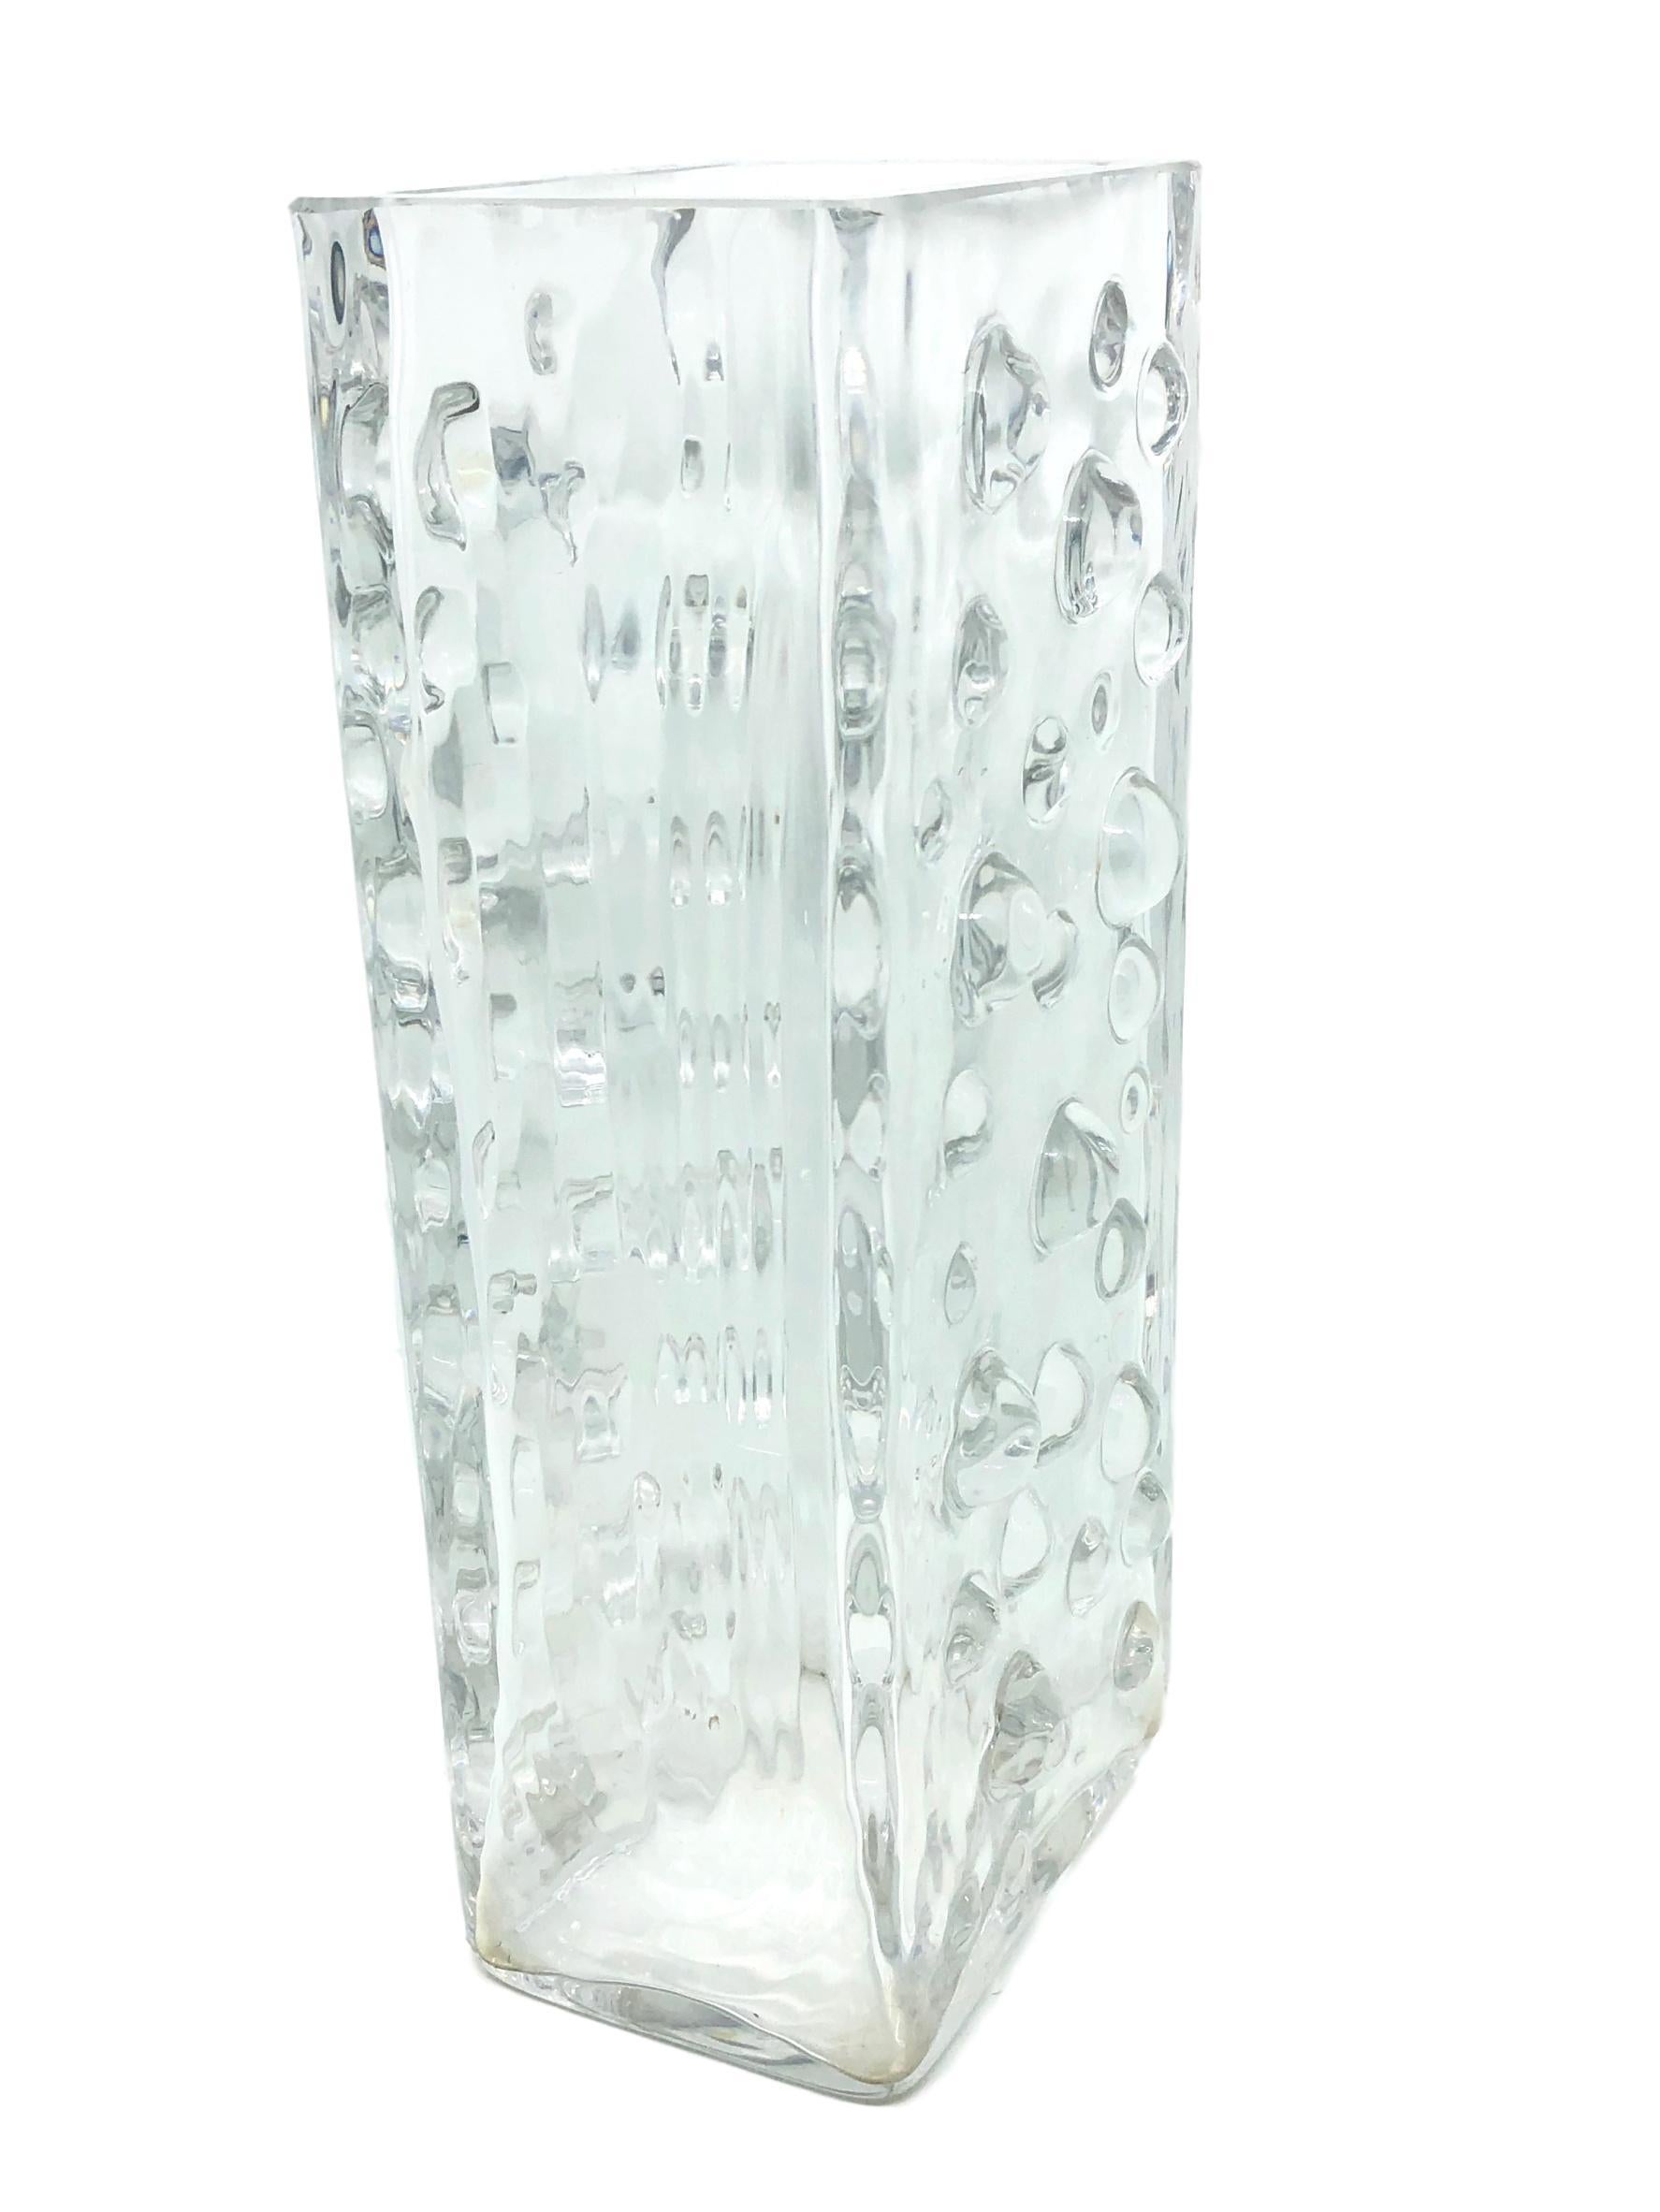 Wonderful Mid-Century Modern German vases by WMF Glas, circa 1970. These beautiful clear colored vase brings a touch of fun and fantasy to any room. Made of very heavy art glass, this nice piece will be a beautiful addition to any room. Little dusty